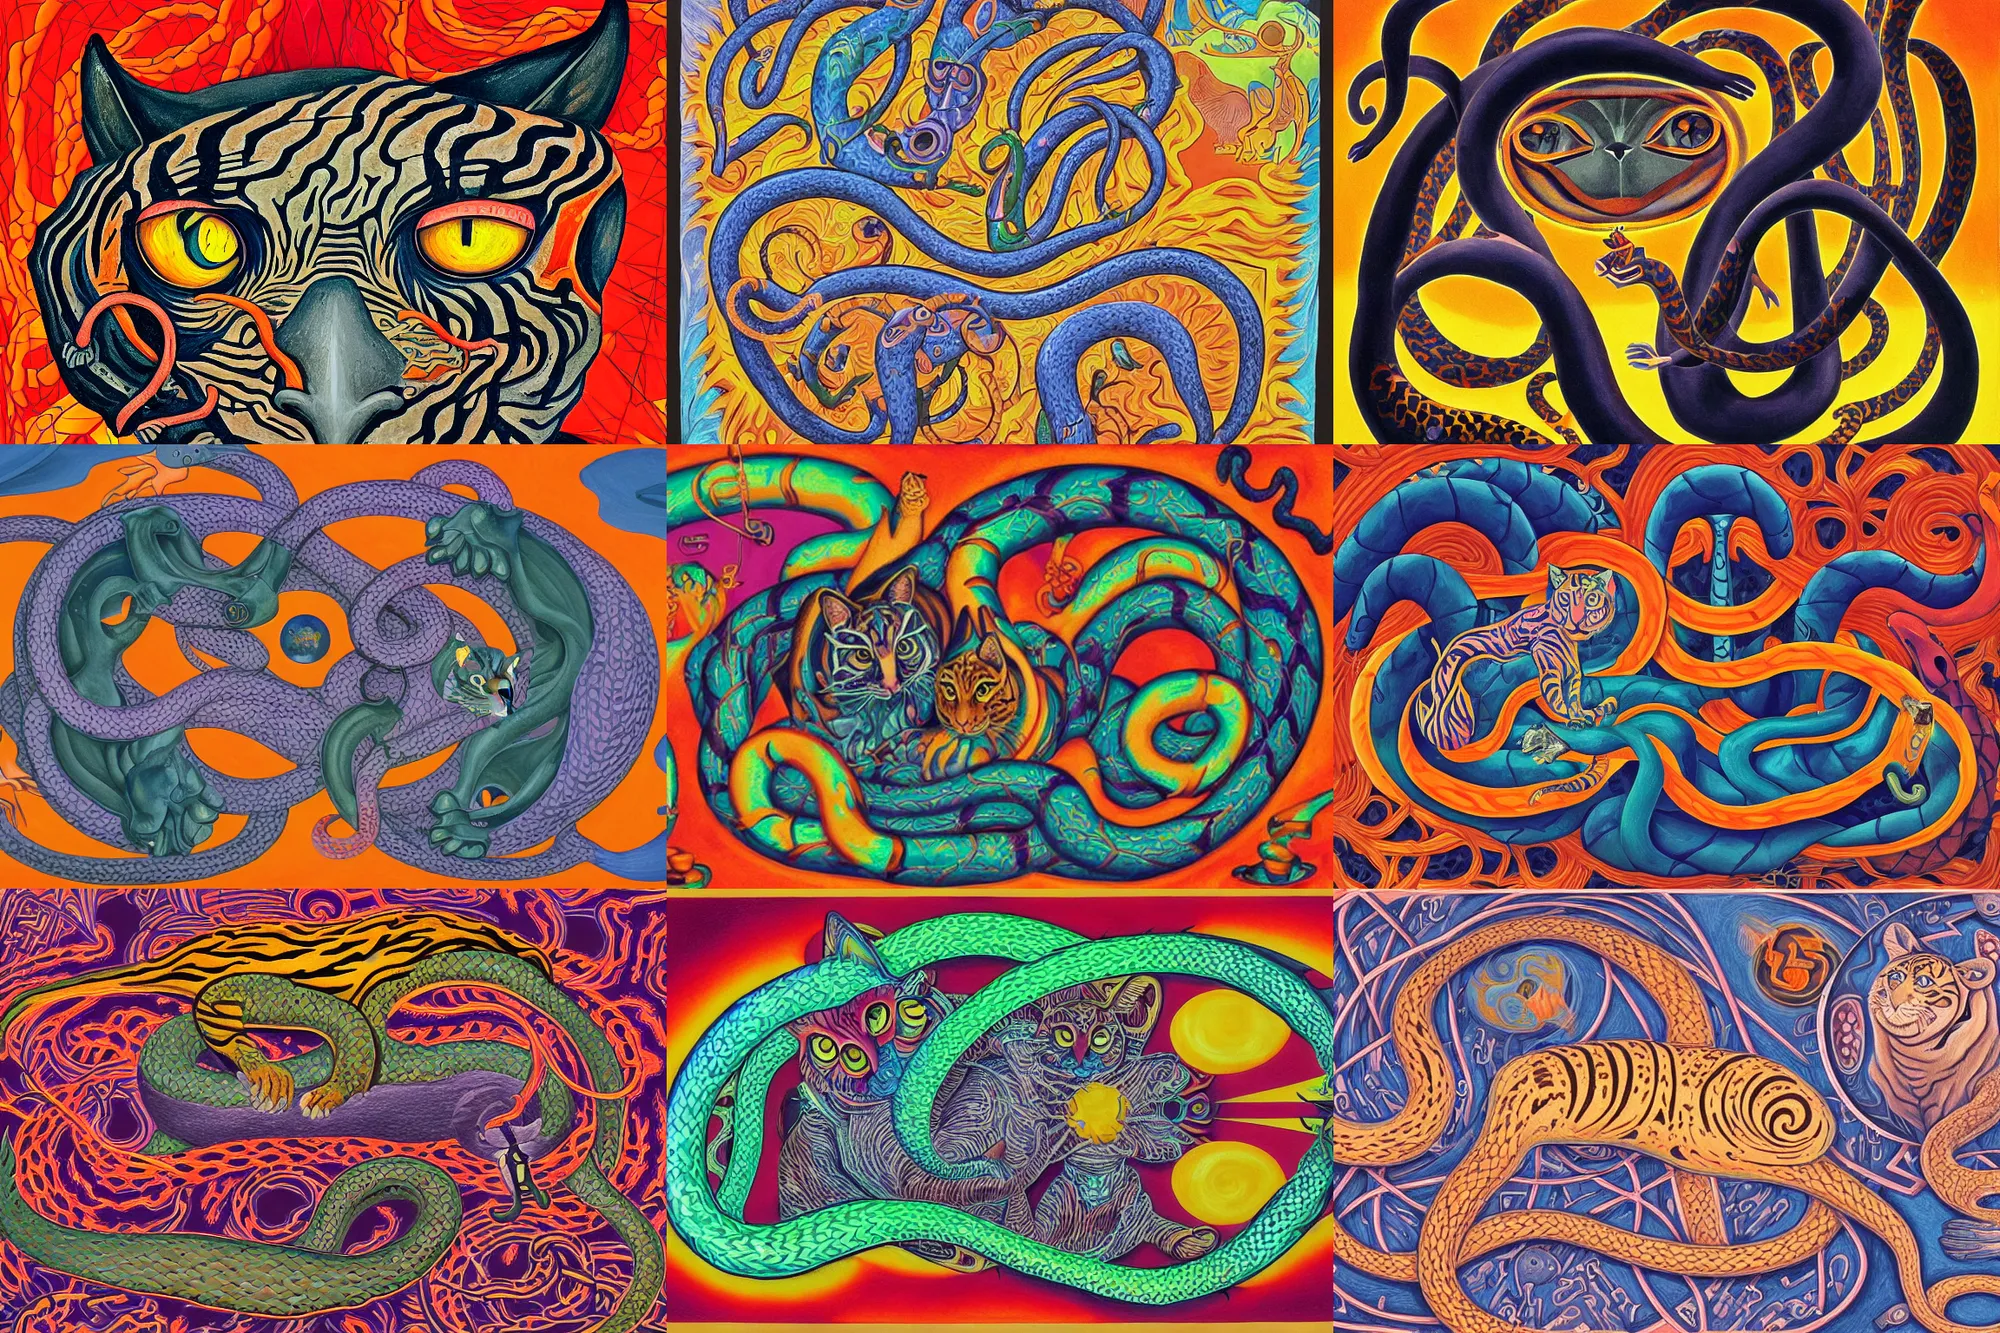 Prompt: a detailed gouache painting of a magick cat occult effigy tiger that is a crescent shaped cat atomic latent snakes in between autobiological cybernetic resurgence of snake phonkadelic inspirations in the style of escher, alex grey, kubrick inspired by surrealism, symbolism, and dark fantasy